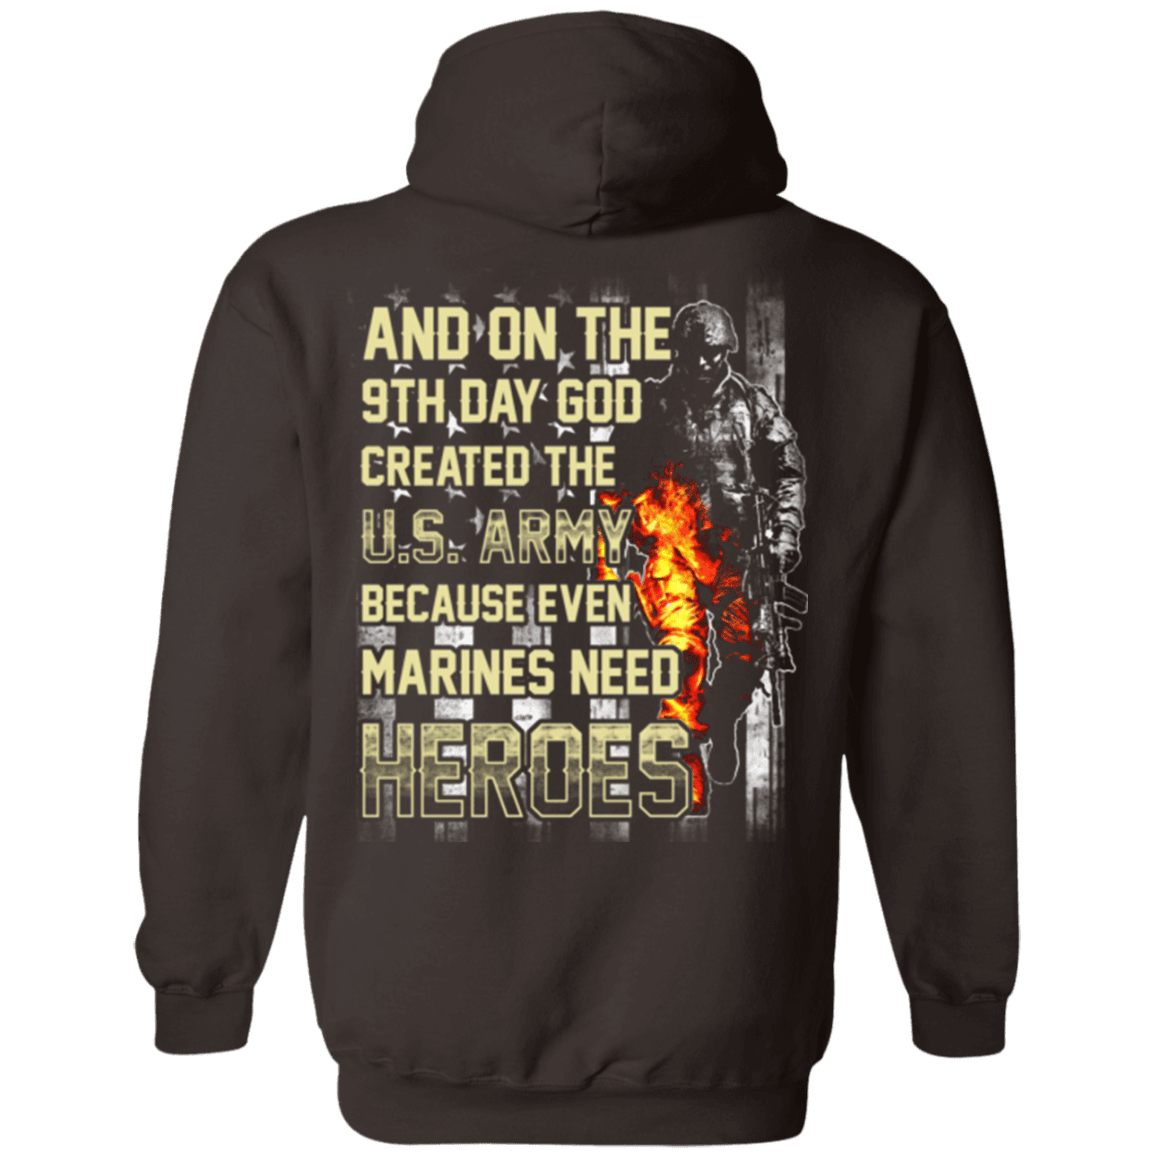 On The 9th Day God Created The US Army T Shirt-TShirt-Army-Veterans Nation